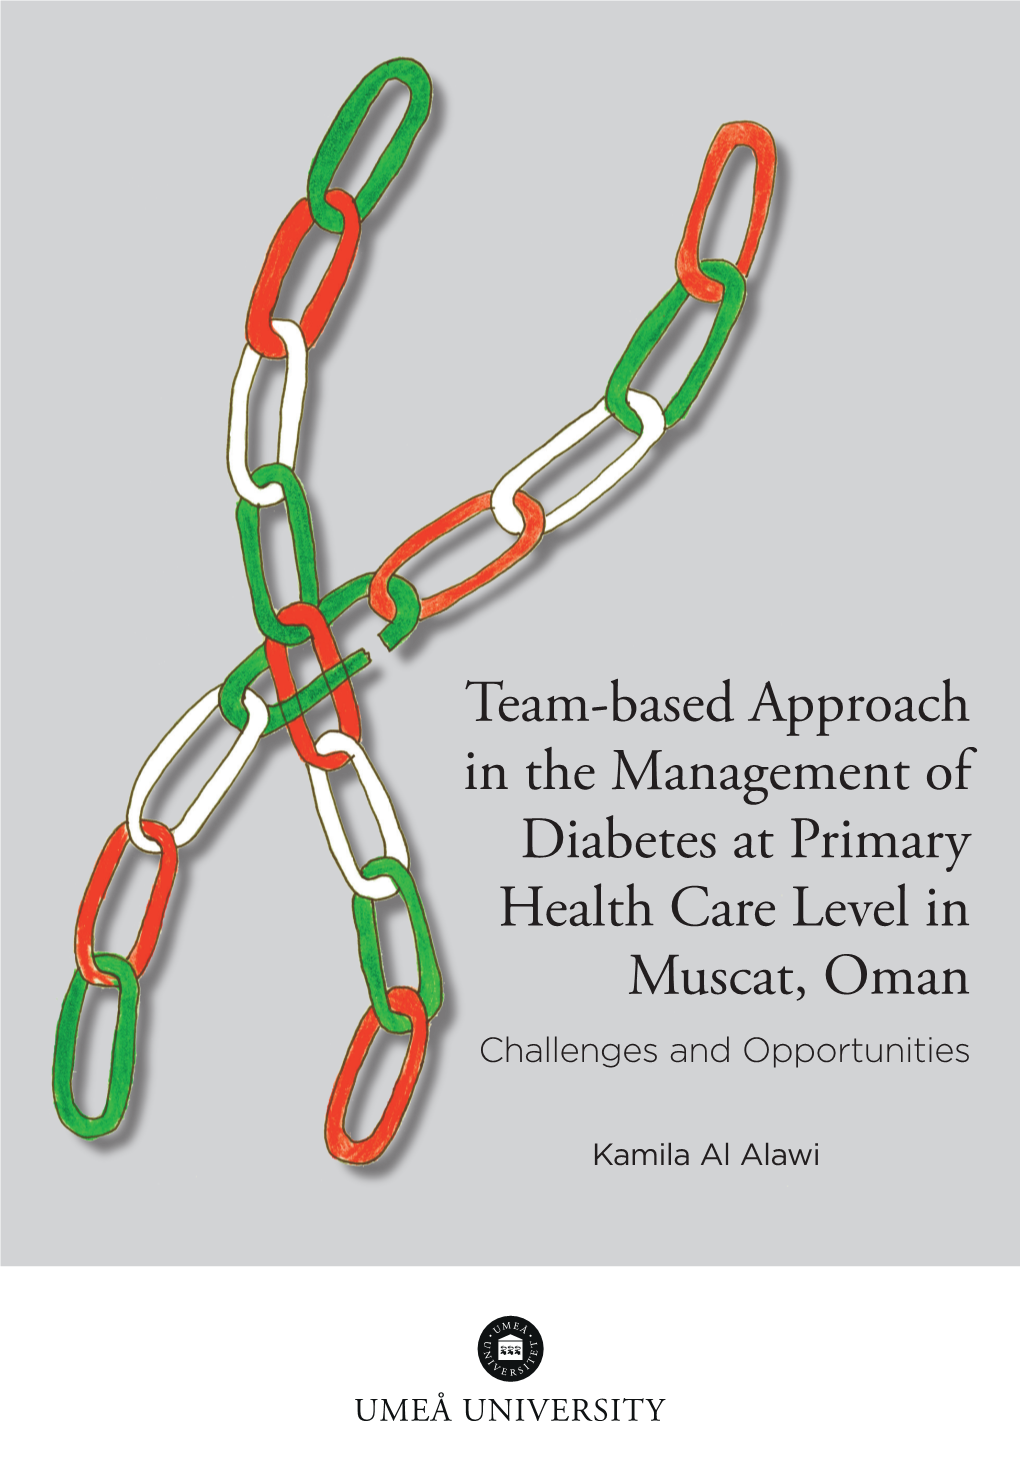 Team-Based Approach in the Management of Diabetes at Primary Health Care Level in Muscat, Oman Challenges and Opportunities